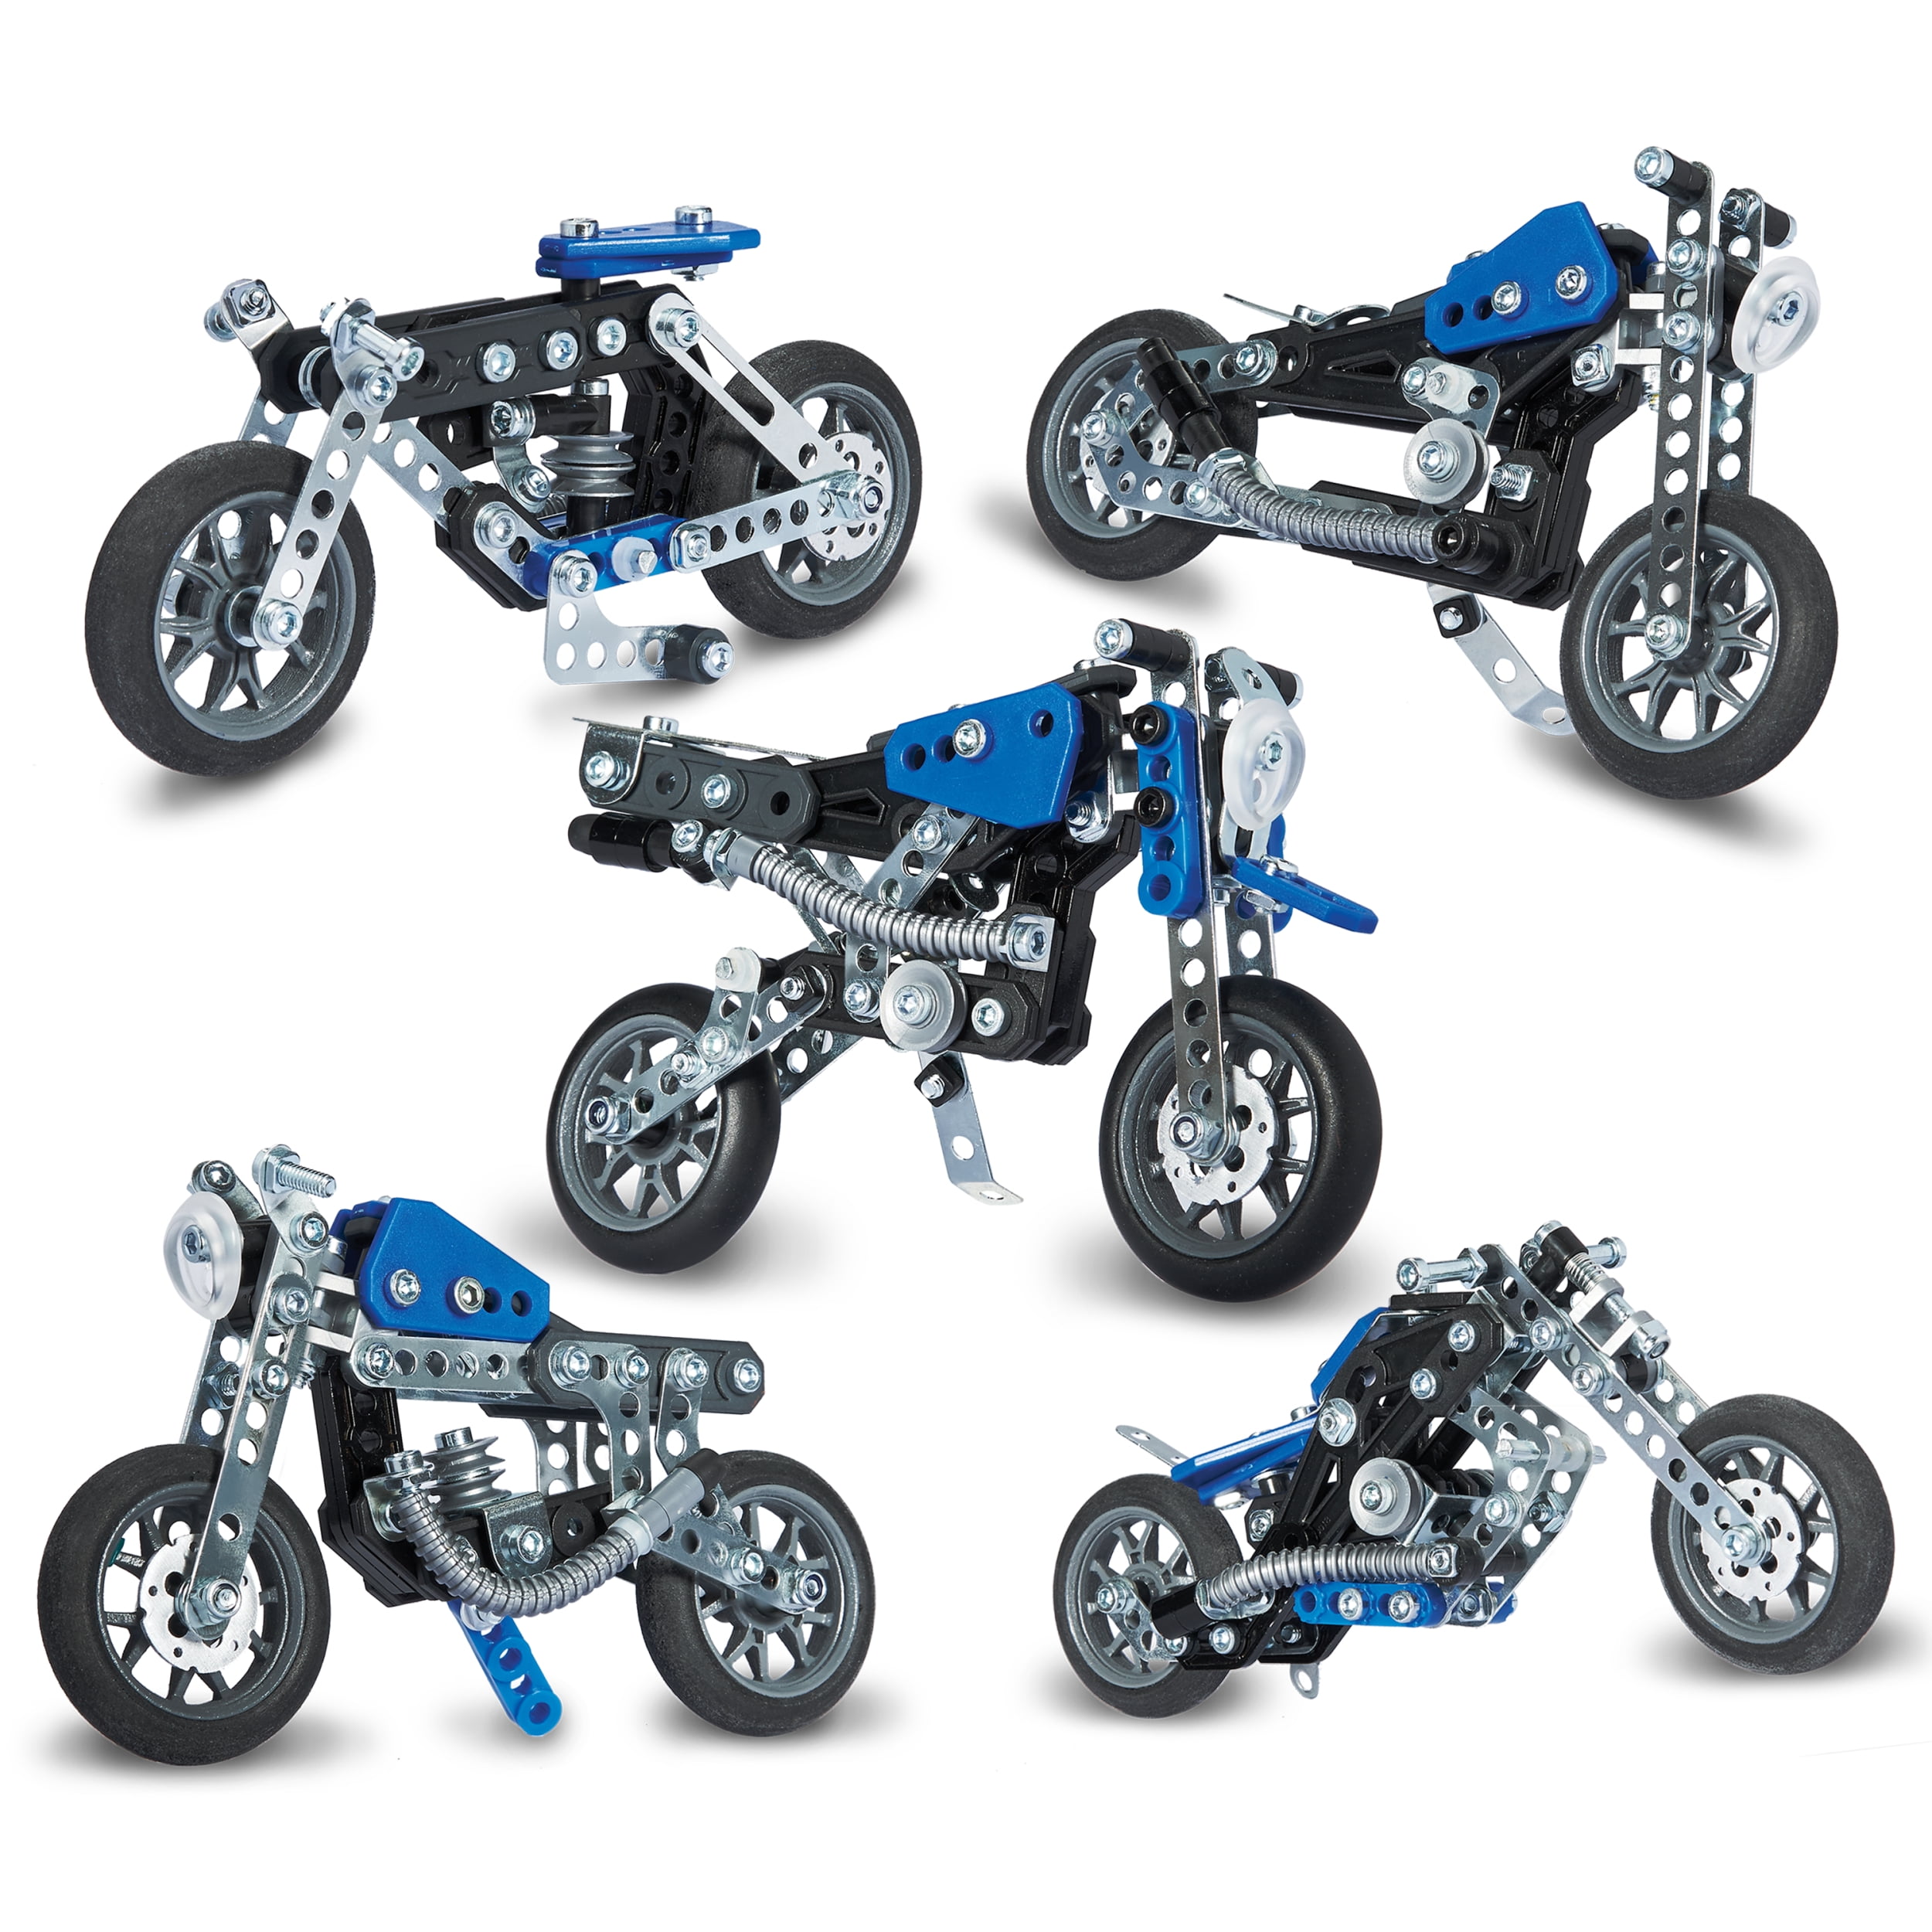 Meccano Erector by, 5 Model Building Set - Race Cars, STEM Engineering  Education Toy, 164 Pieces, For Ages 8 and up